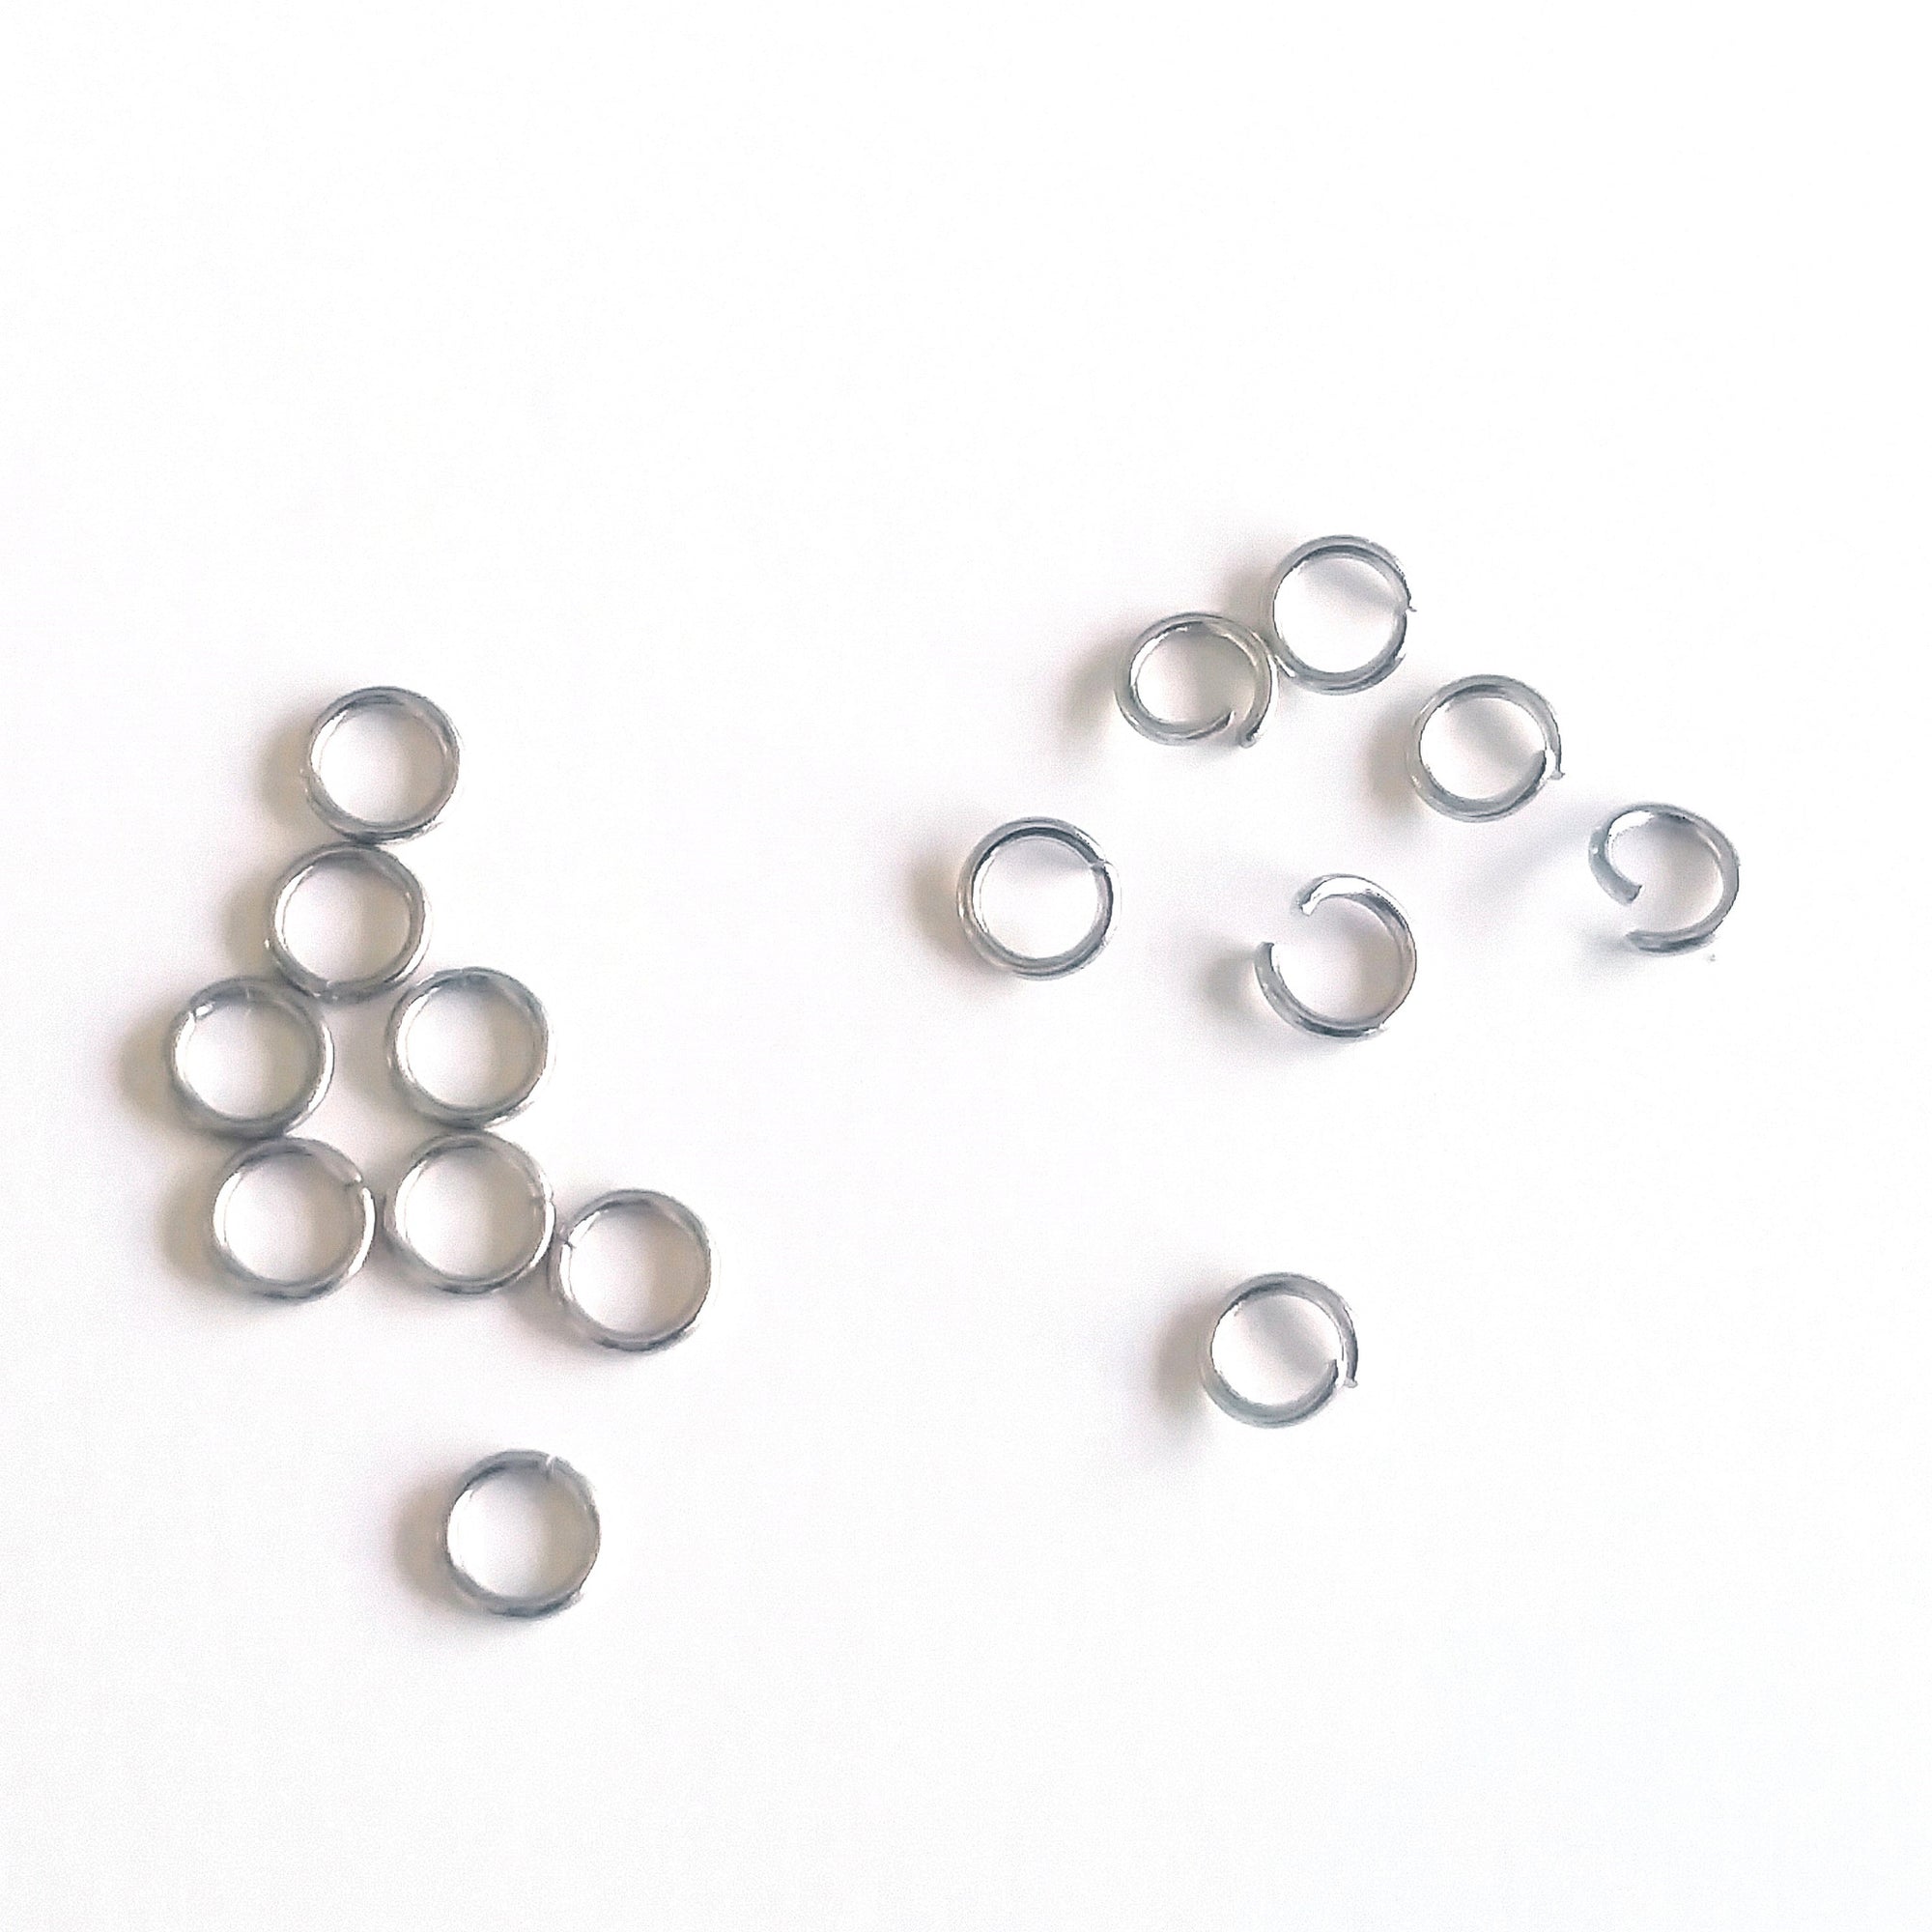 100 Heavyweight 16g Jump Rings Stainless Steel Open 6mm 7mm 9mm